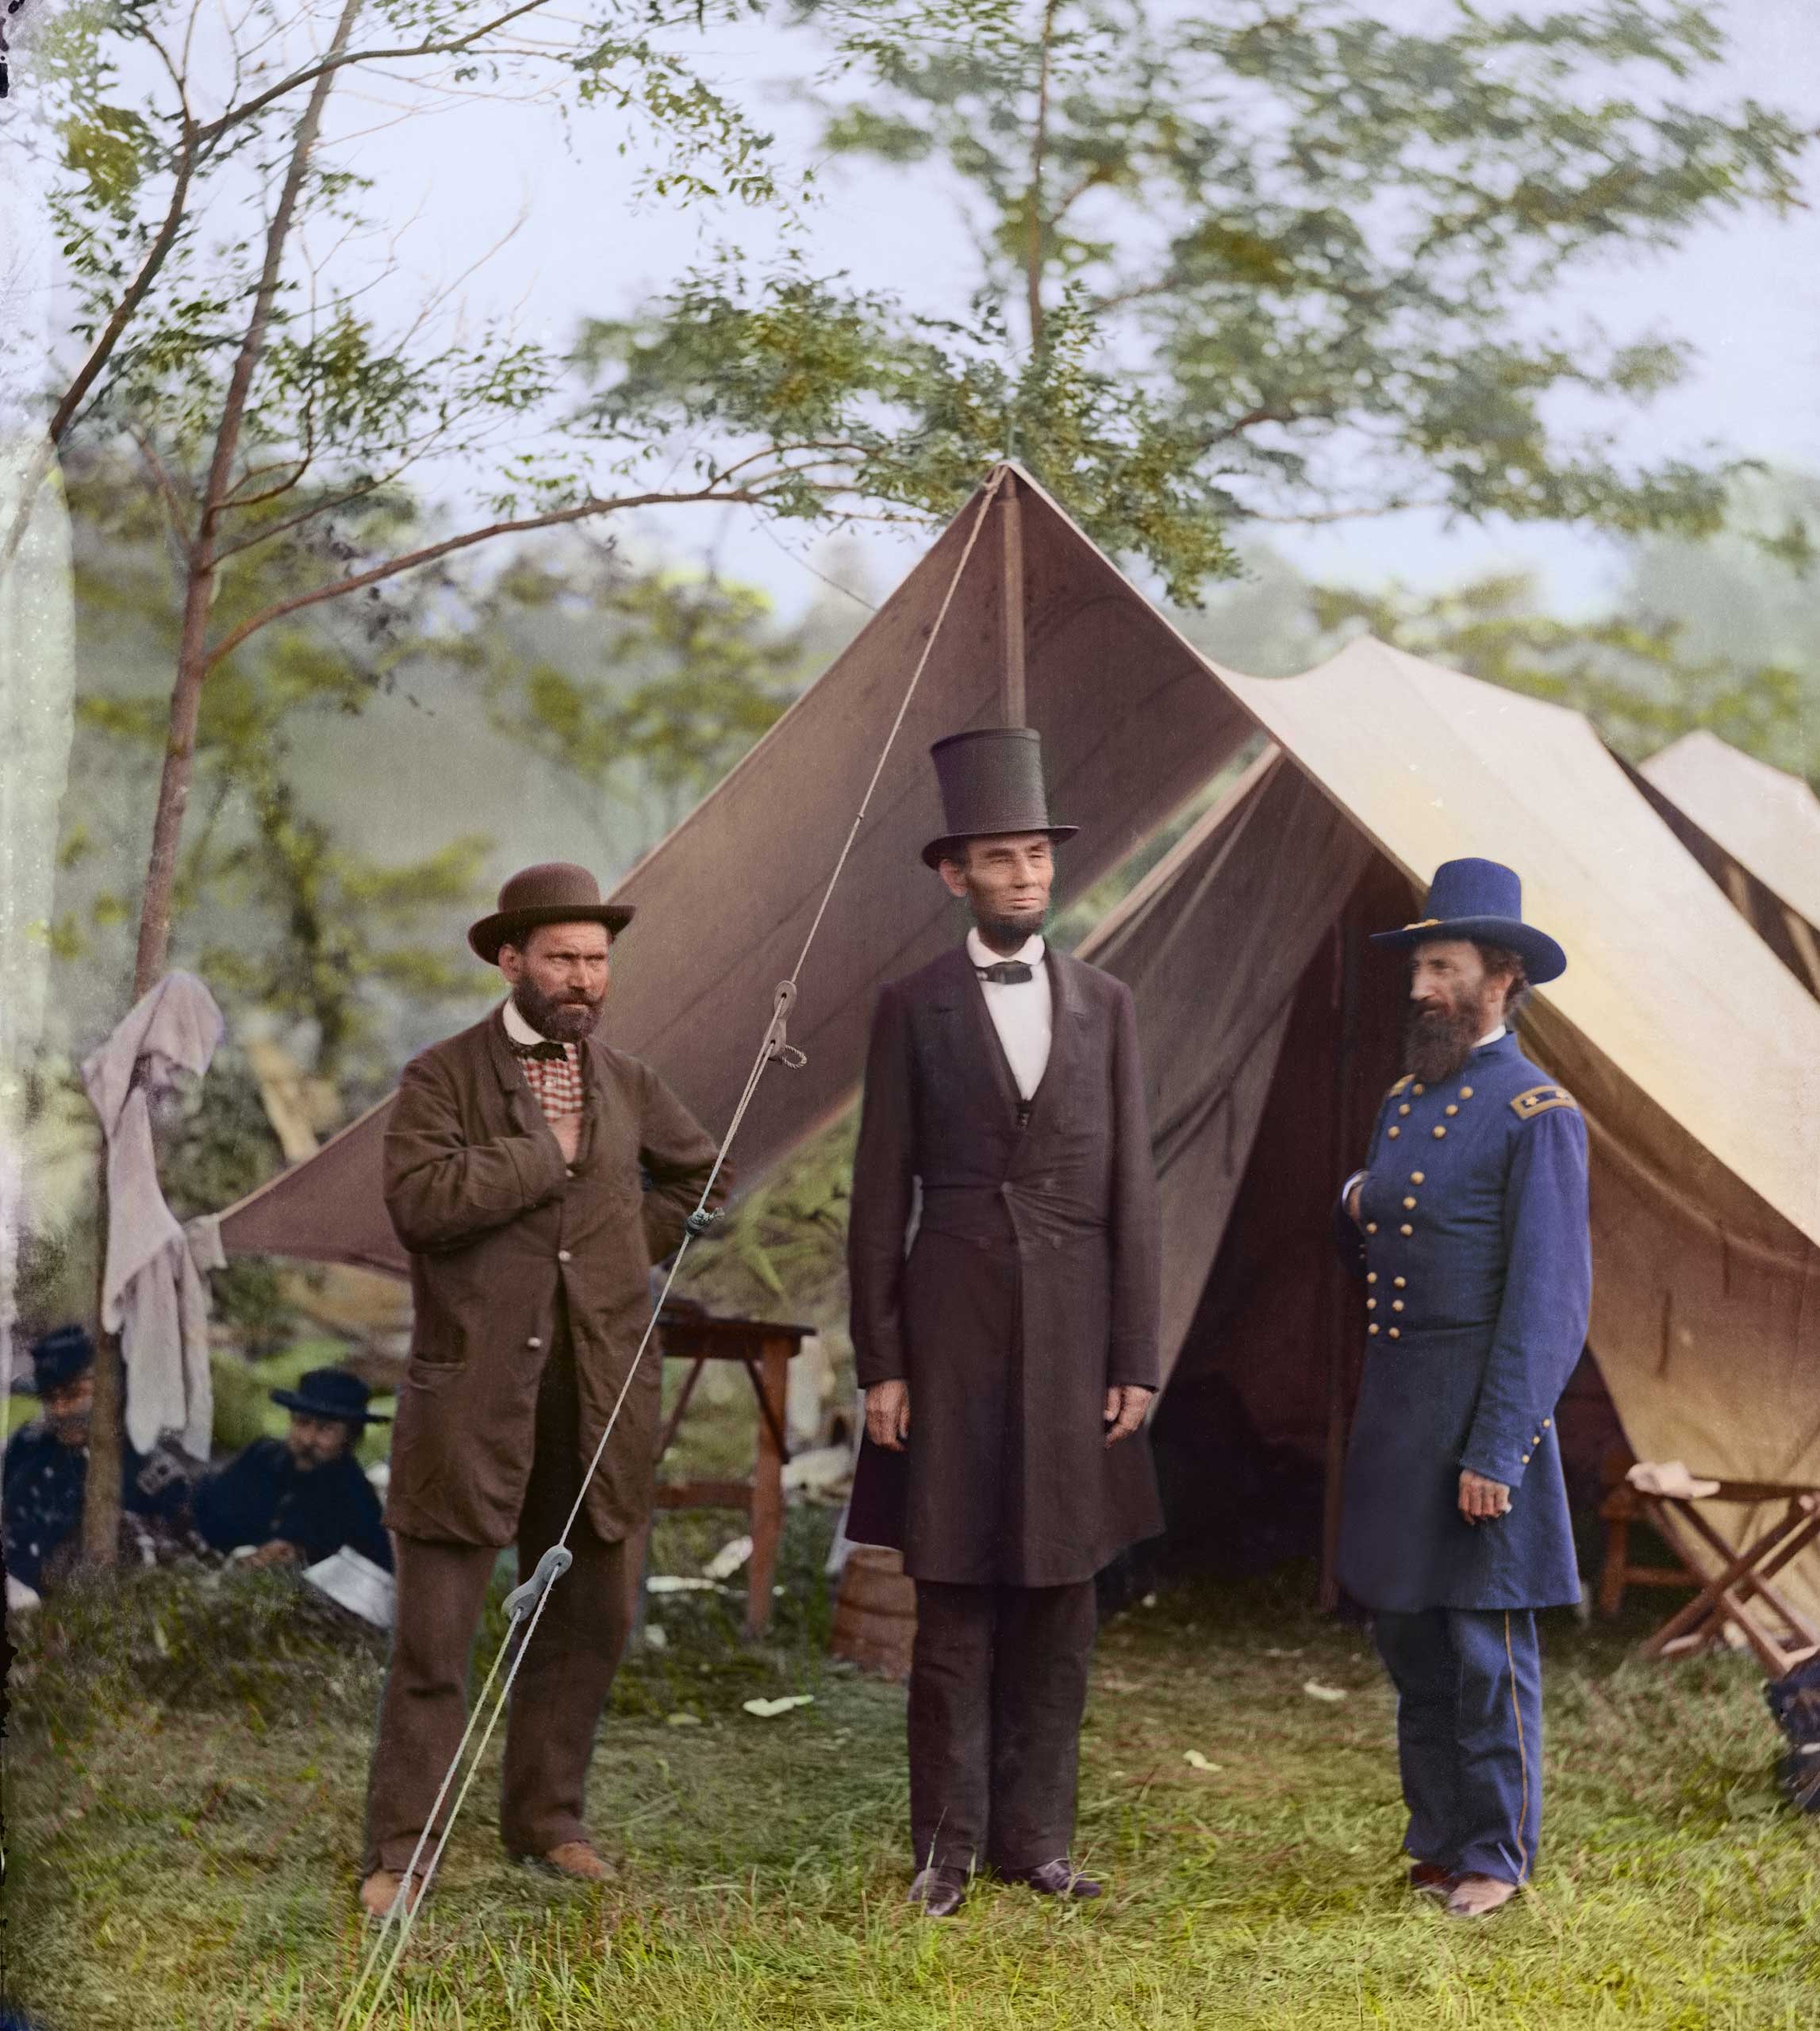 Allan Pinkerton, President Lincoln, and Maj. Gen. John A. McClernand; at the main eastern theater of the war, Battle of Antietam, Sept.-Oct., 1862.